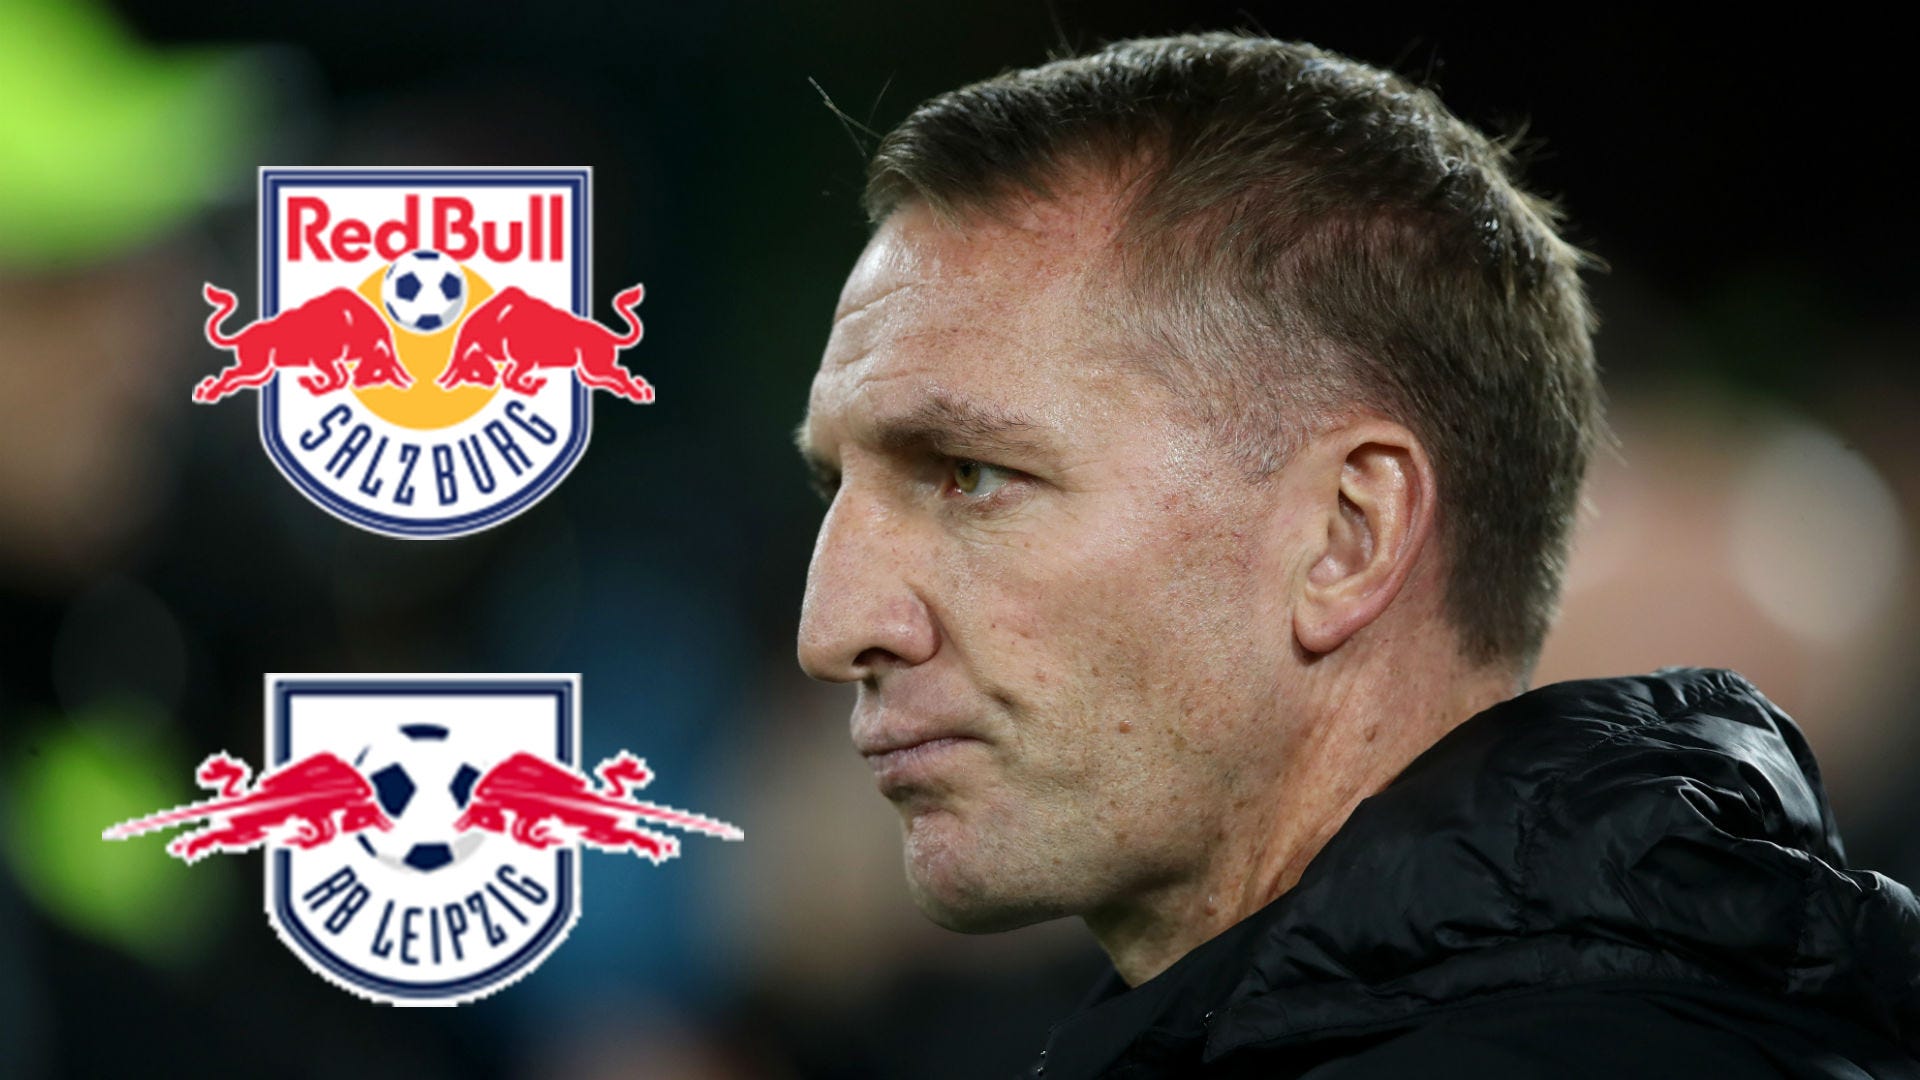 Red Bull Salzburg vs RB Leipzig: Why Celtic's Europa League fate rest on controversial result | Goal.com Qatar